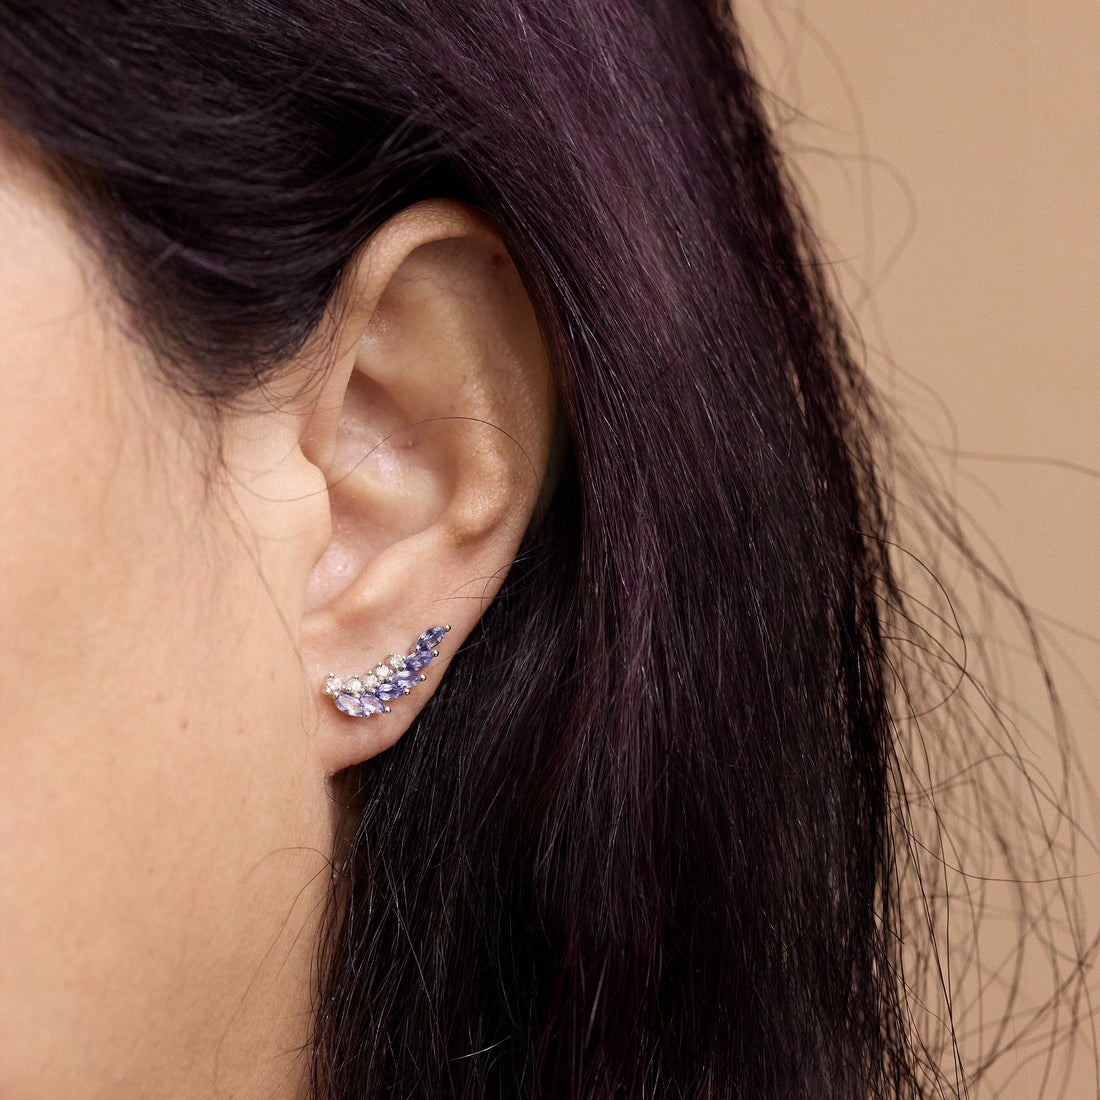 Curved Crawler Earrings with Lavender Tanzanite &amp; Diamonds